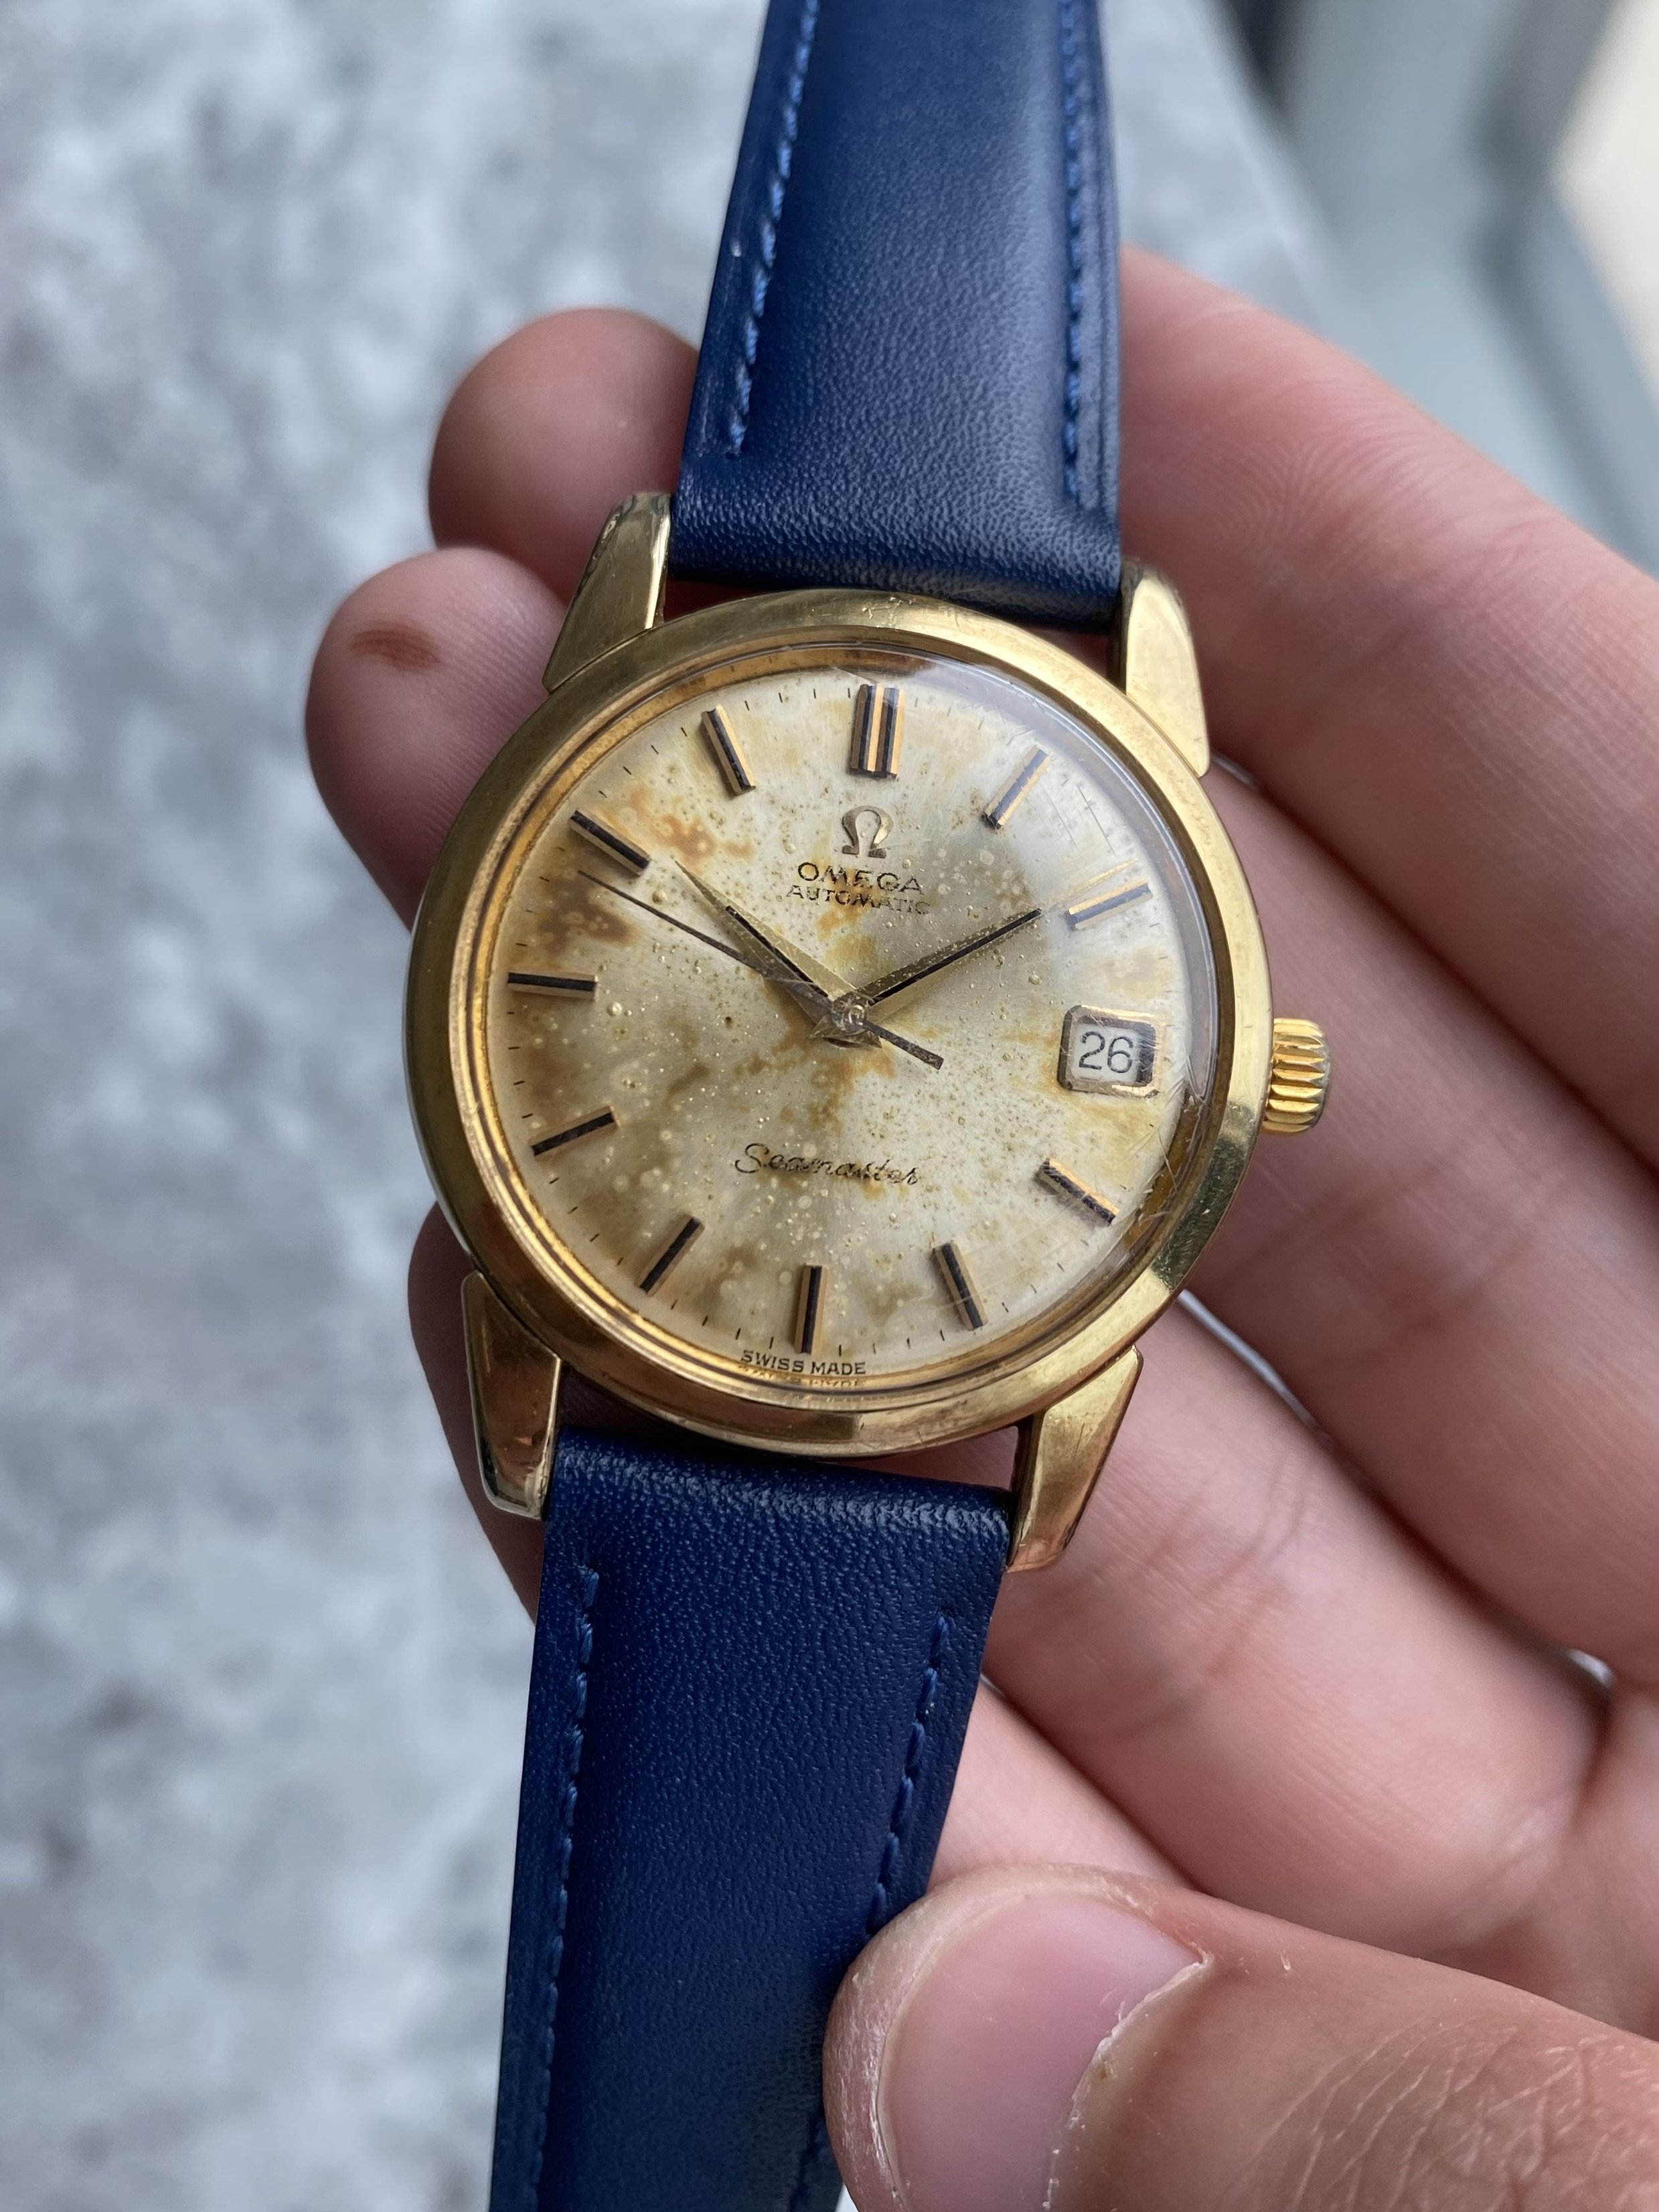 Omega Seamaster - Patina Dial. — Danny's Vintage Watches